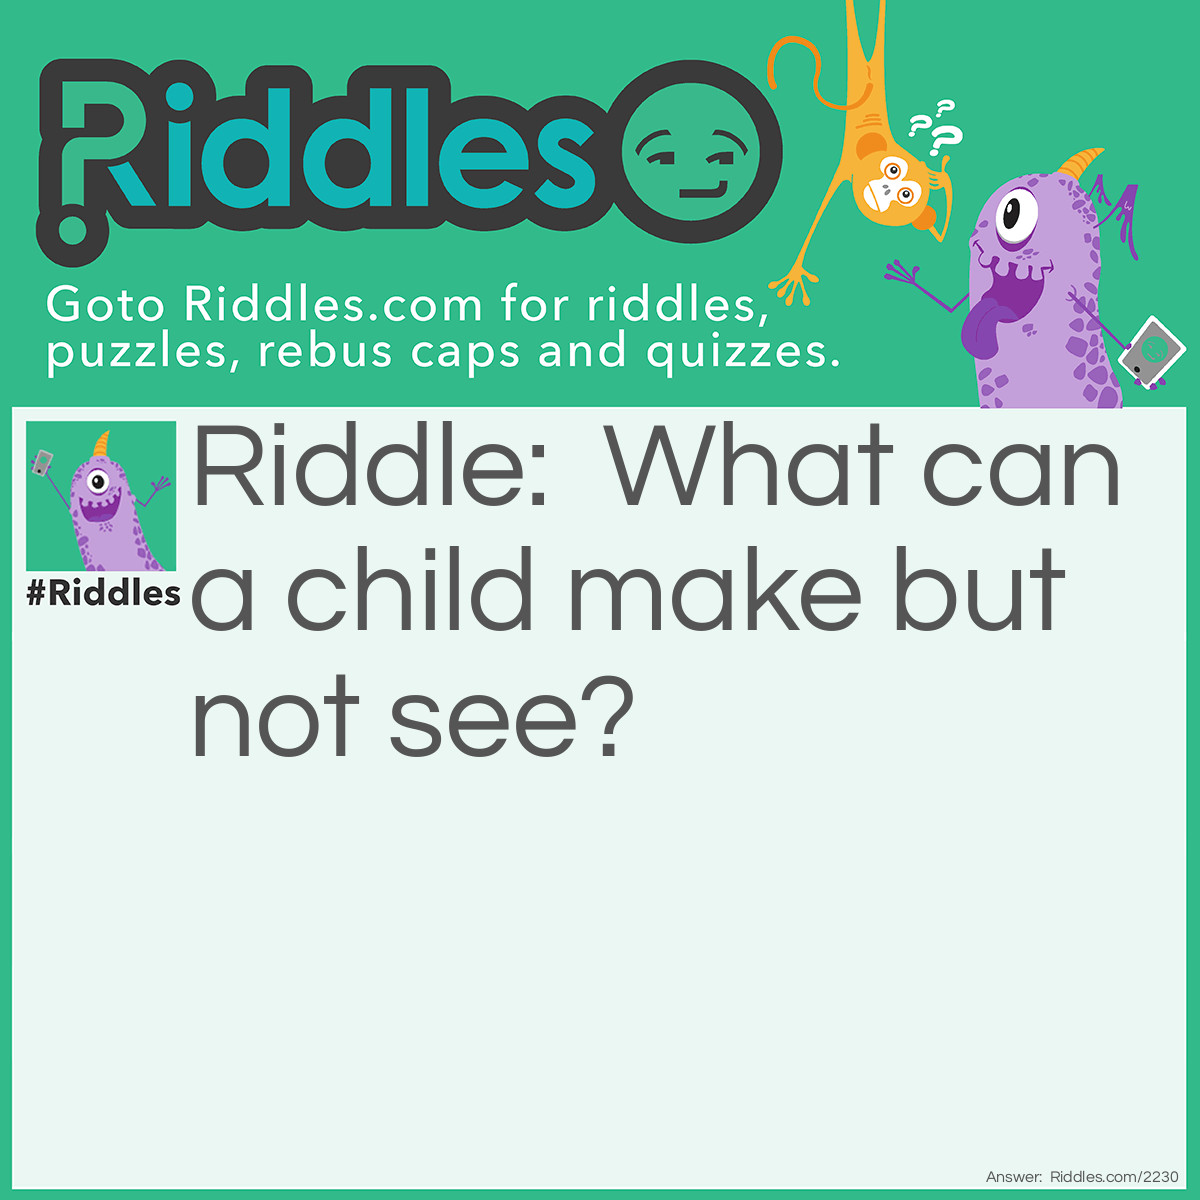 Riddle: What can a child make but not see? Answer: Noise.